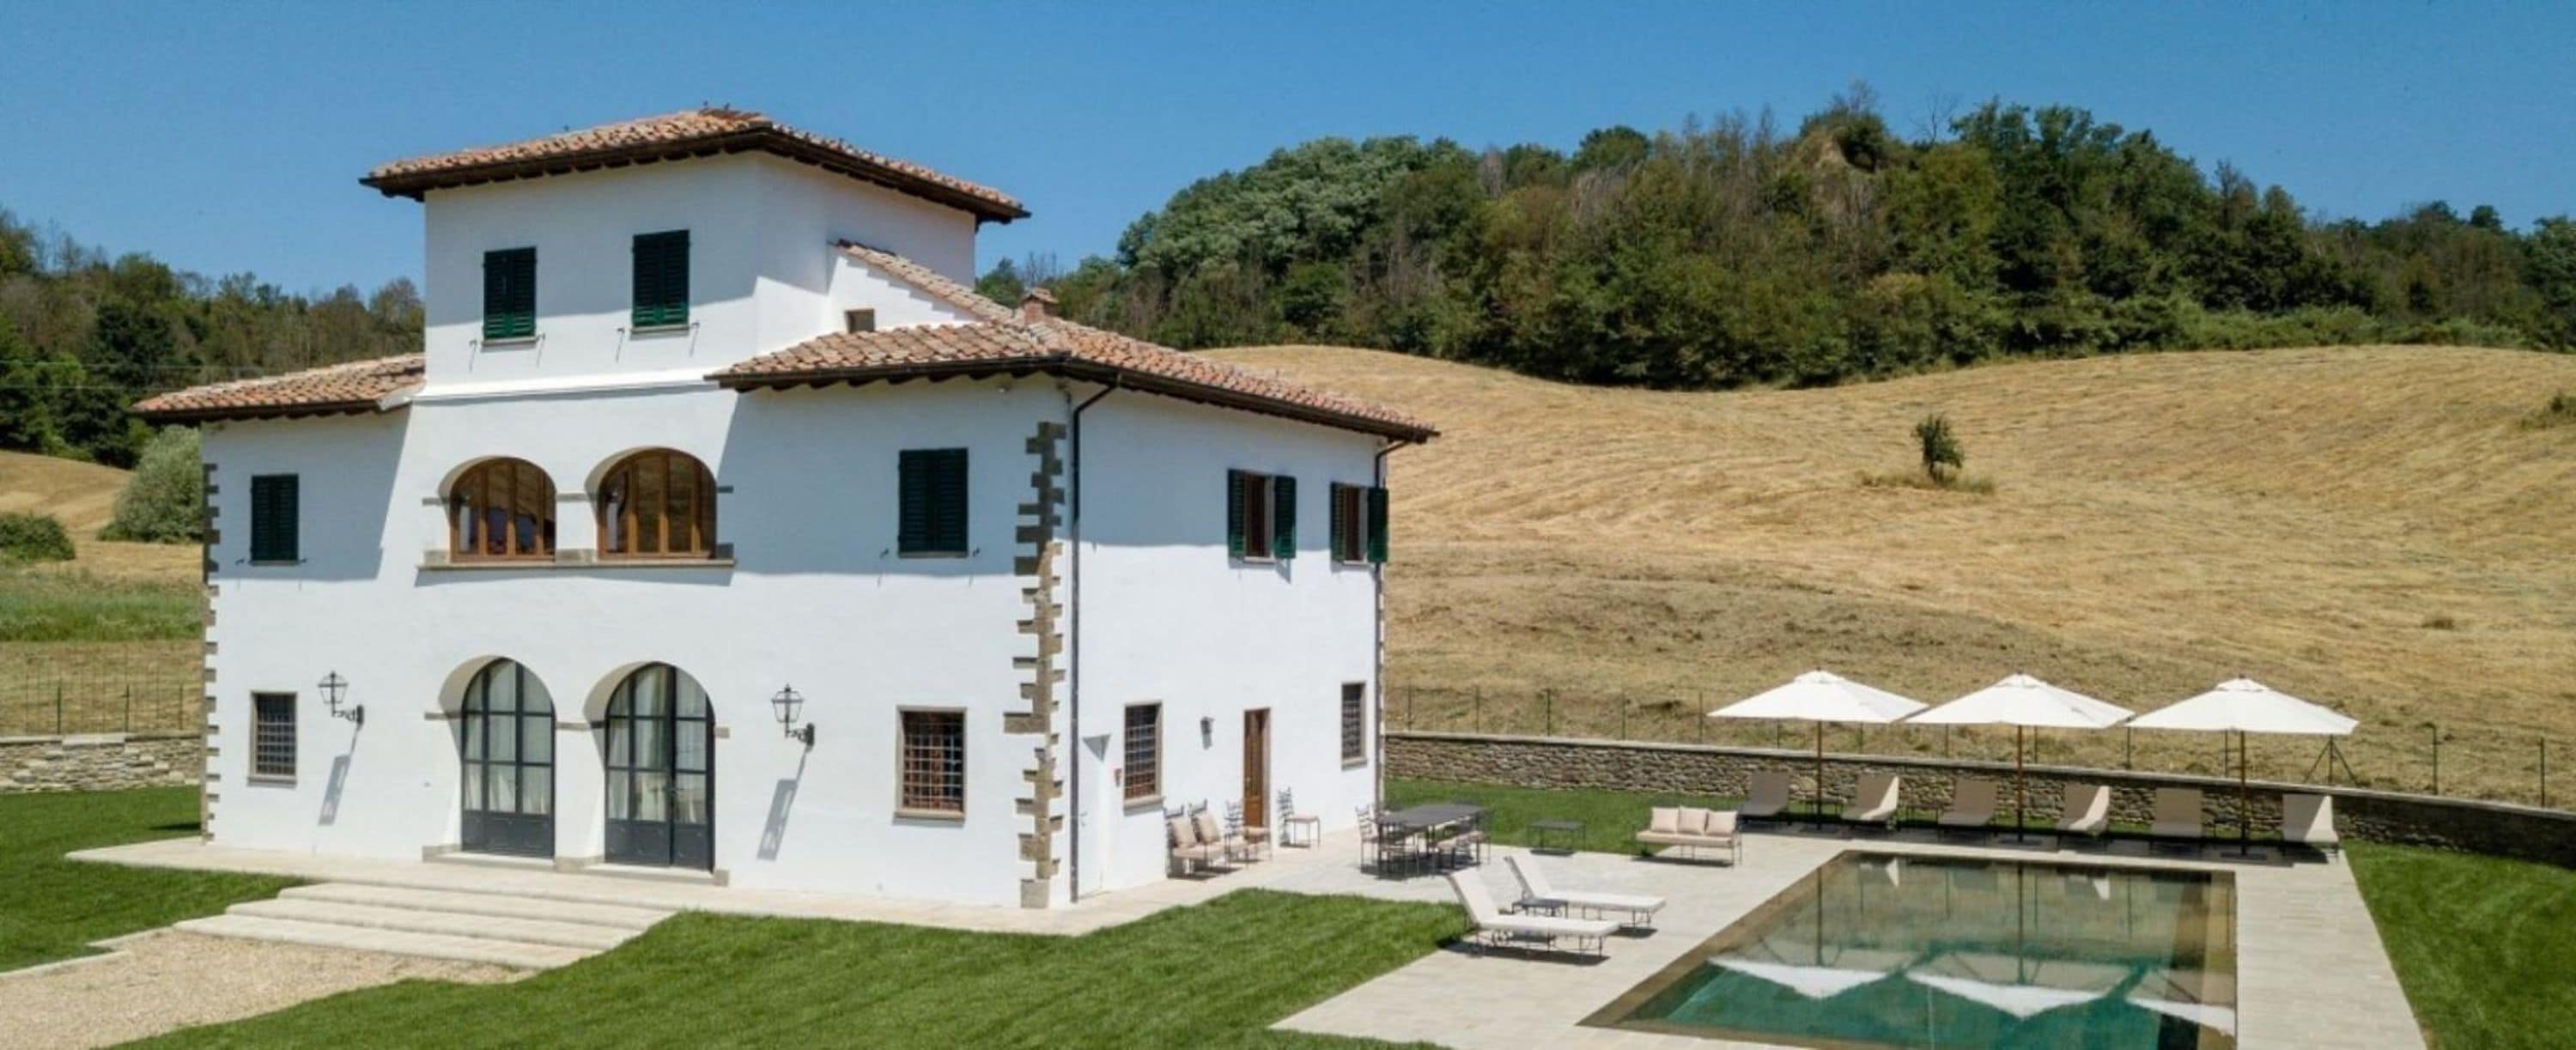 Property Image 1 - Luxury villa in panoramic location 30 minutes from Florence-VILLA IL CIGNO